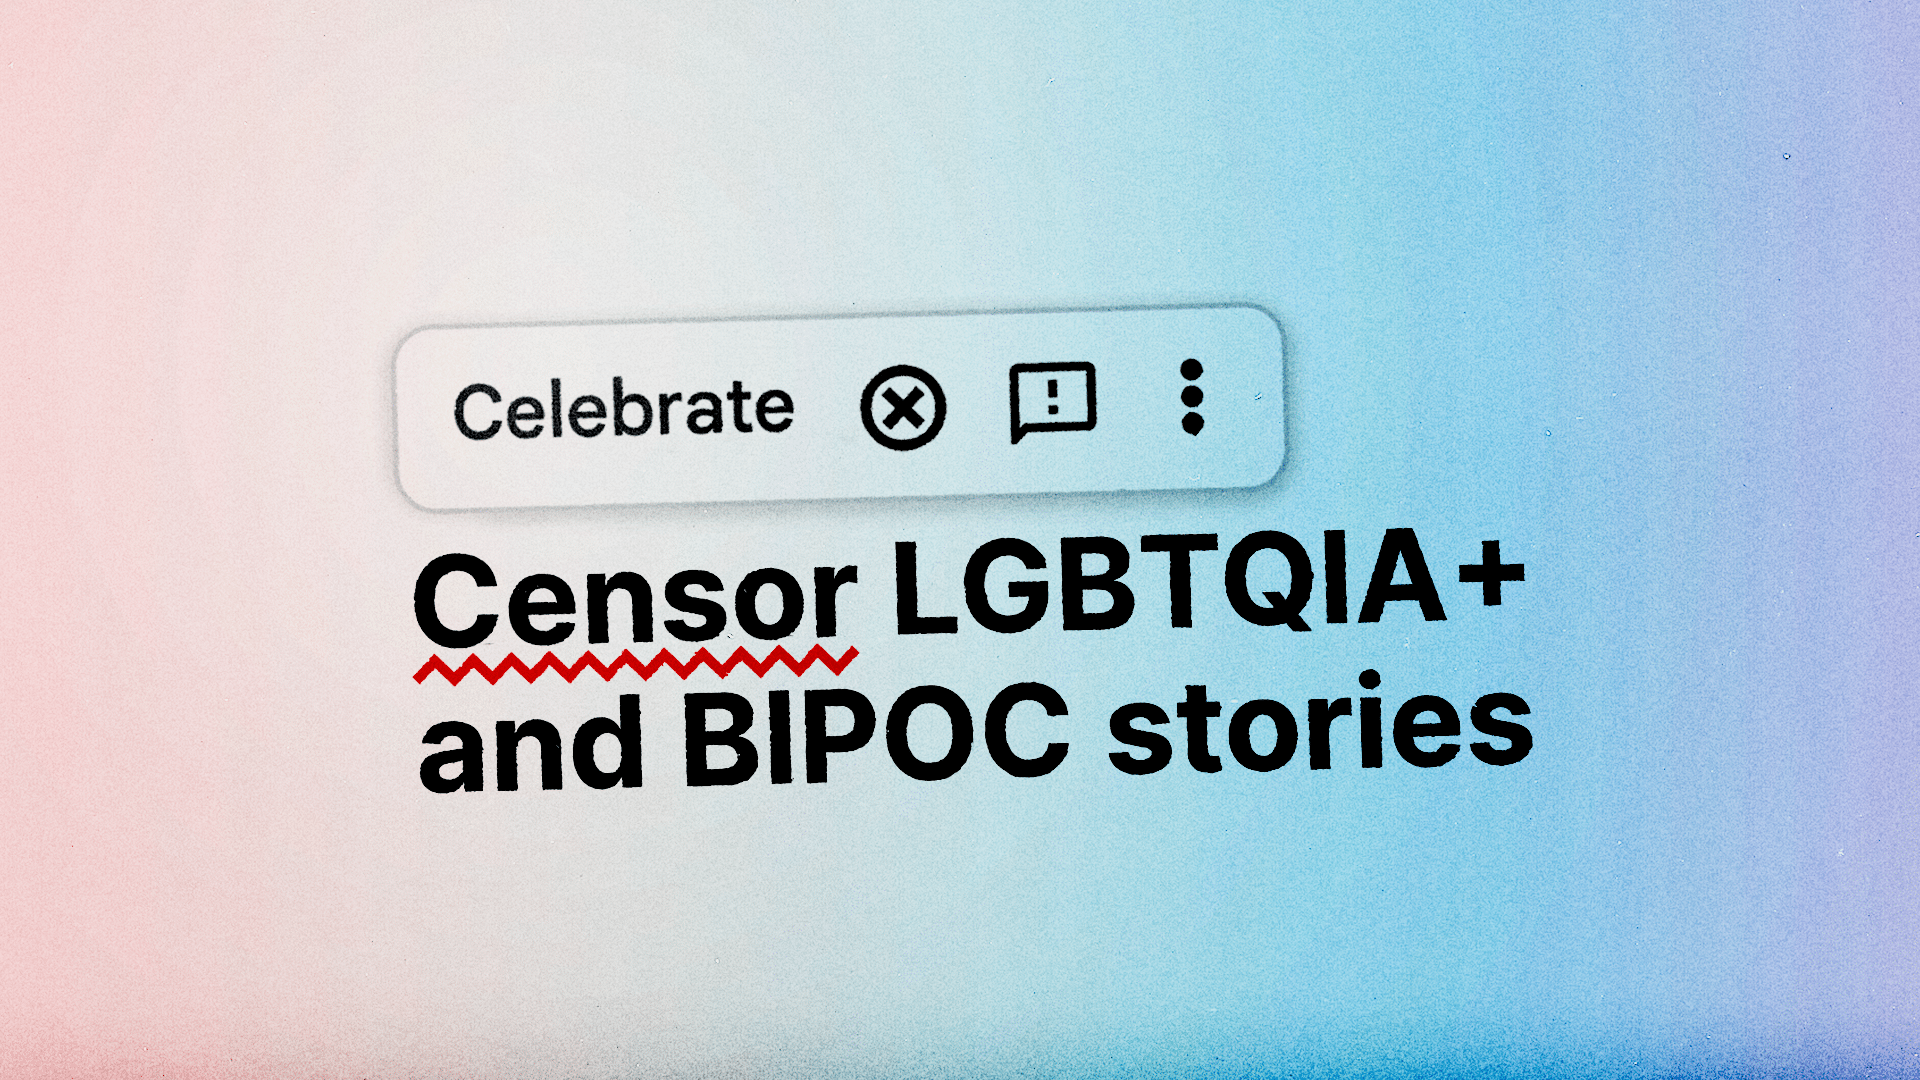 Text reading "Censor LGBTQIA+ and BIPOC stories" with "censor" red underlined prompting a texting correction to read "Celebrate LGBTQIA+ and BIPOC stories"